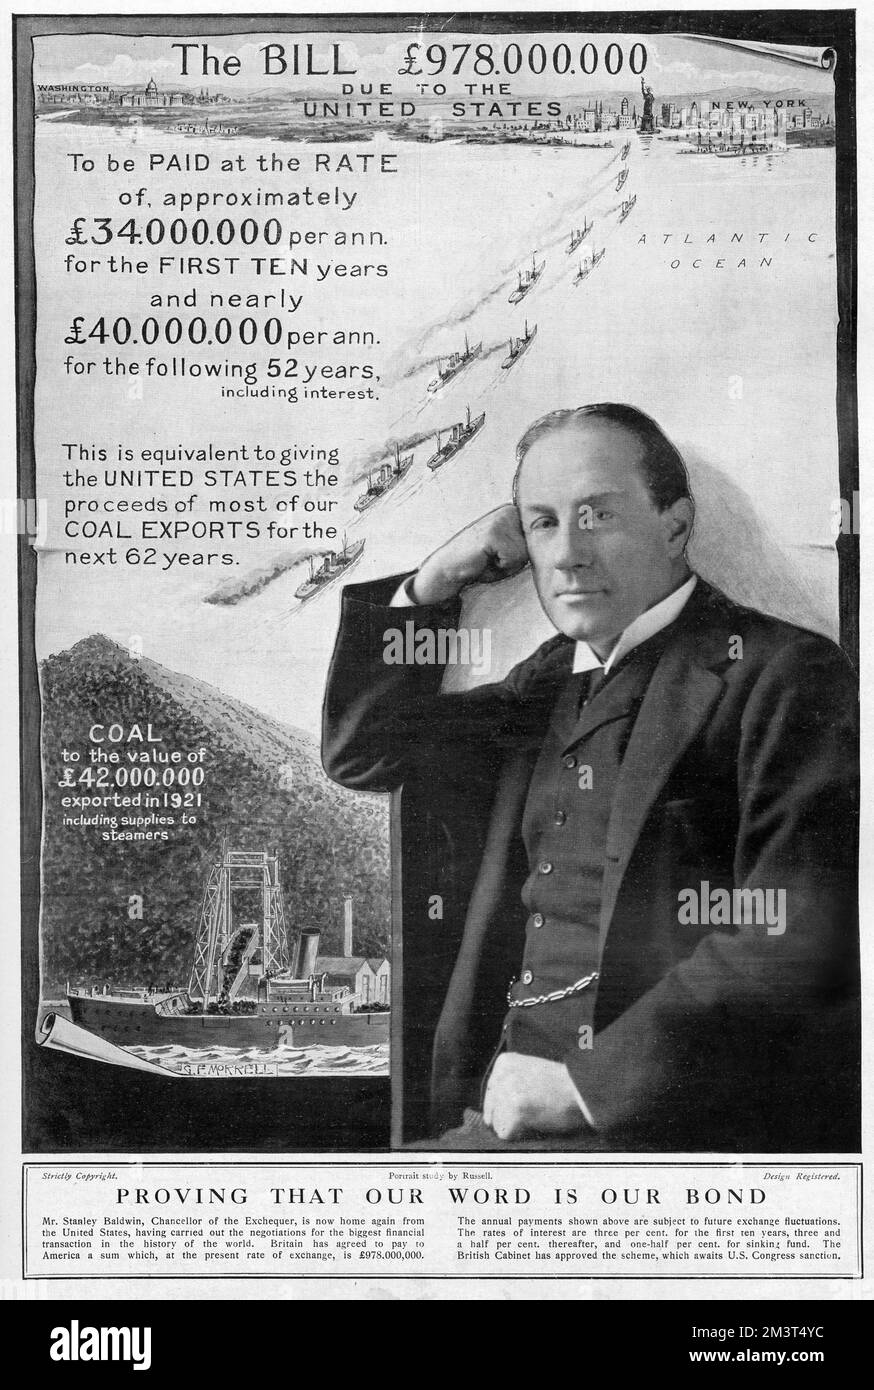 Illustration of the deal Stanley Baldwin, as Chancellor of the Exchequer, agreed with the United States to pay war debt after the First World War. Proving that our word is our bond: Britain has agreed to pay to America a sum of £978,000,000, to be paid at the rate of £34,000,000 per annum for the first ten years, and £40,000,000 per annum for the following 52 years, including interest. This the equivalent of giving the USA the proceeds of most of British coal exports for the next 62 years. The British Cabinet has approved the scheme which awaits US Congress sanction. Stock Photo